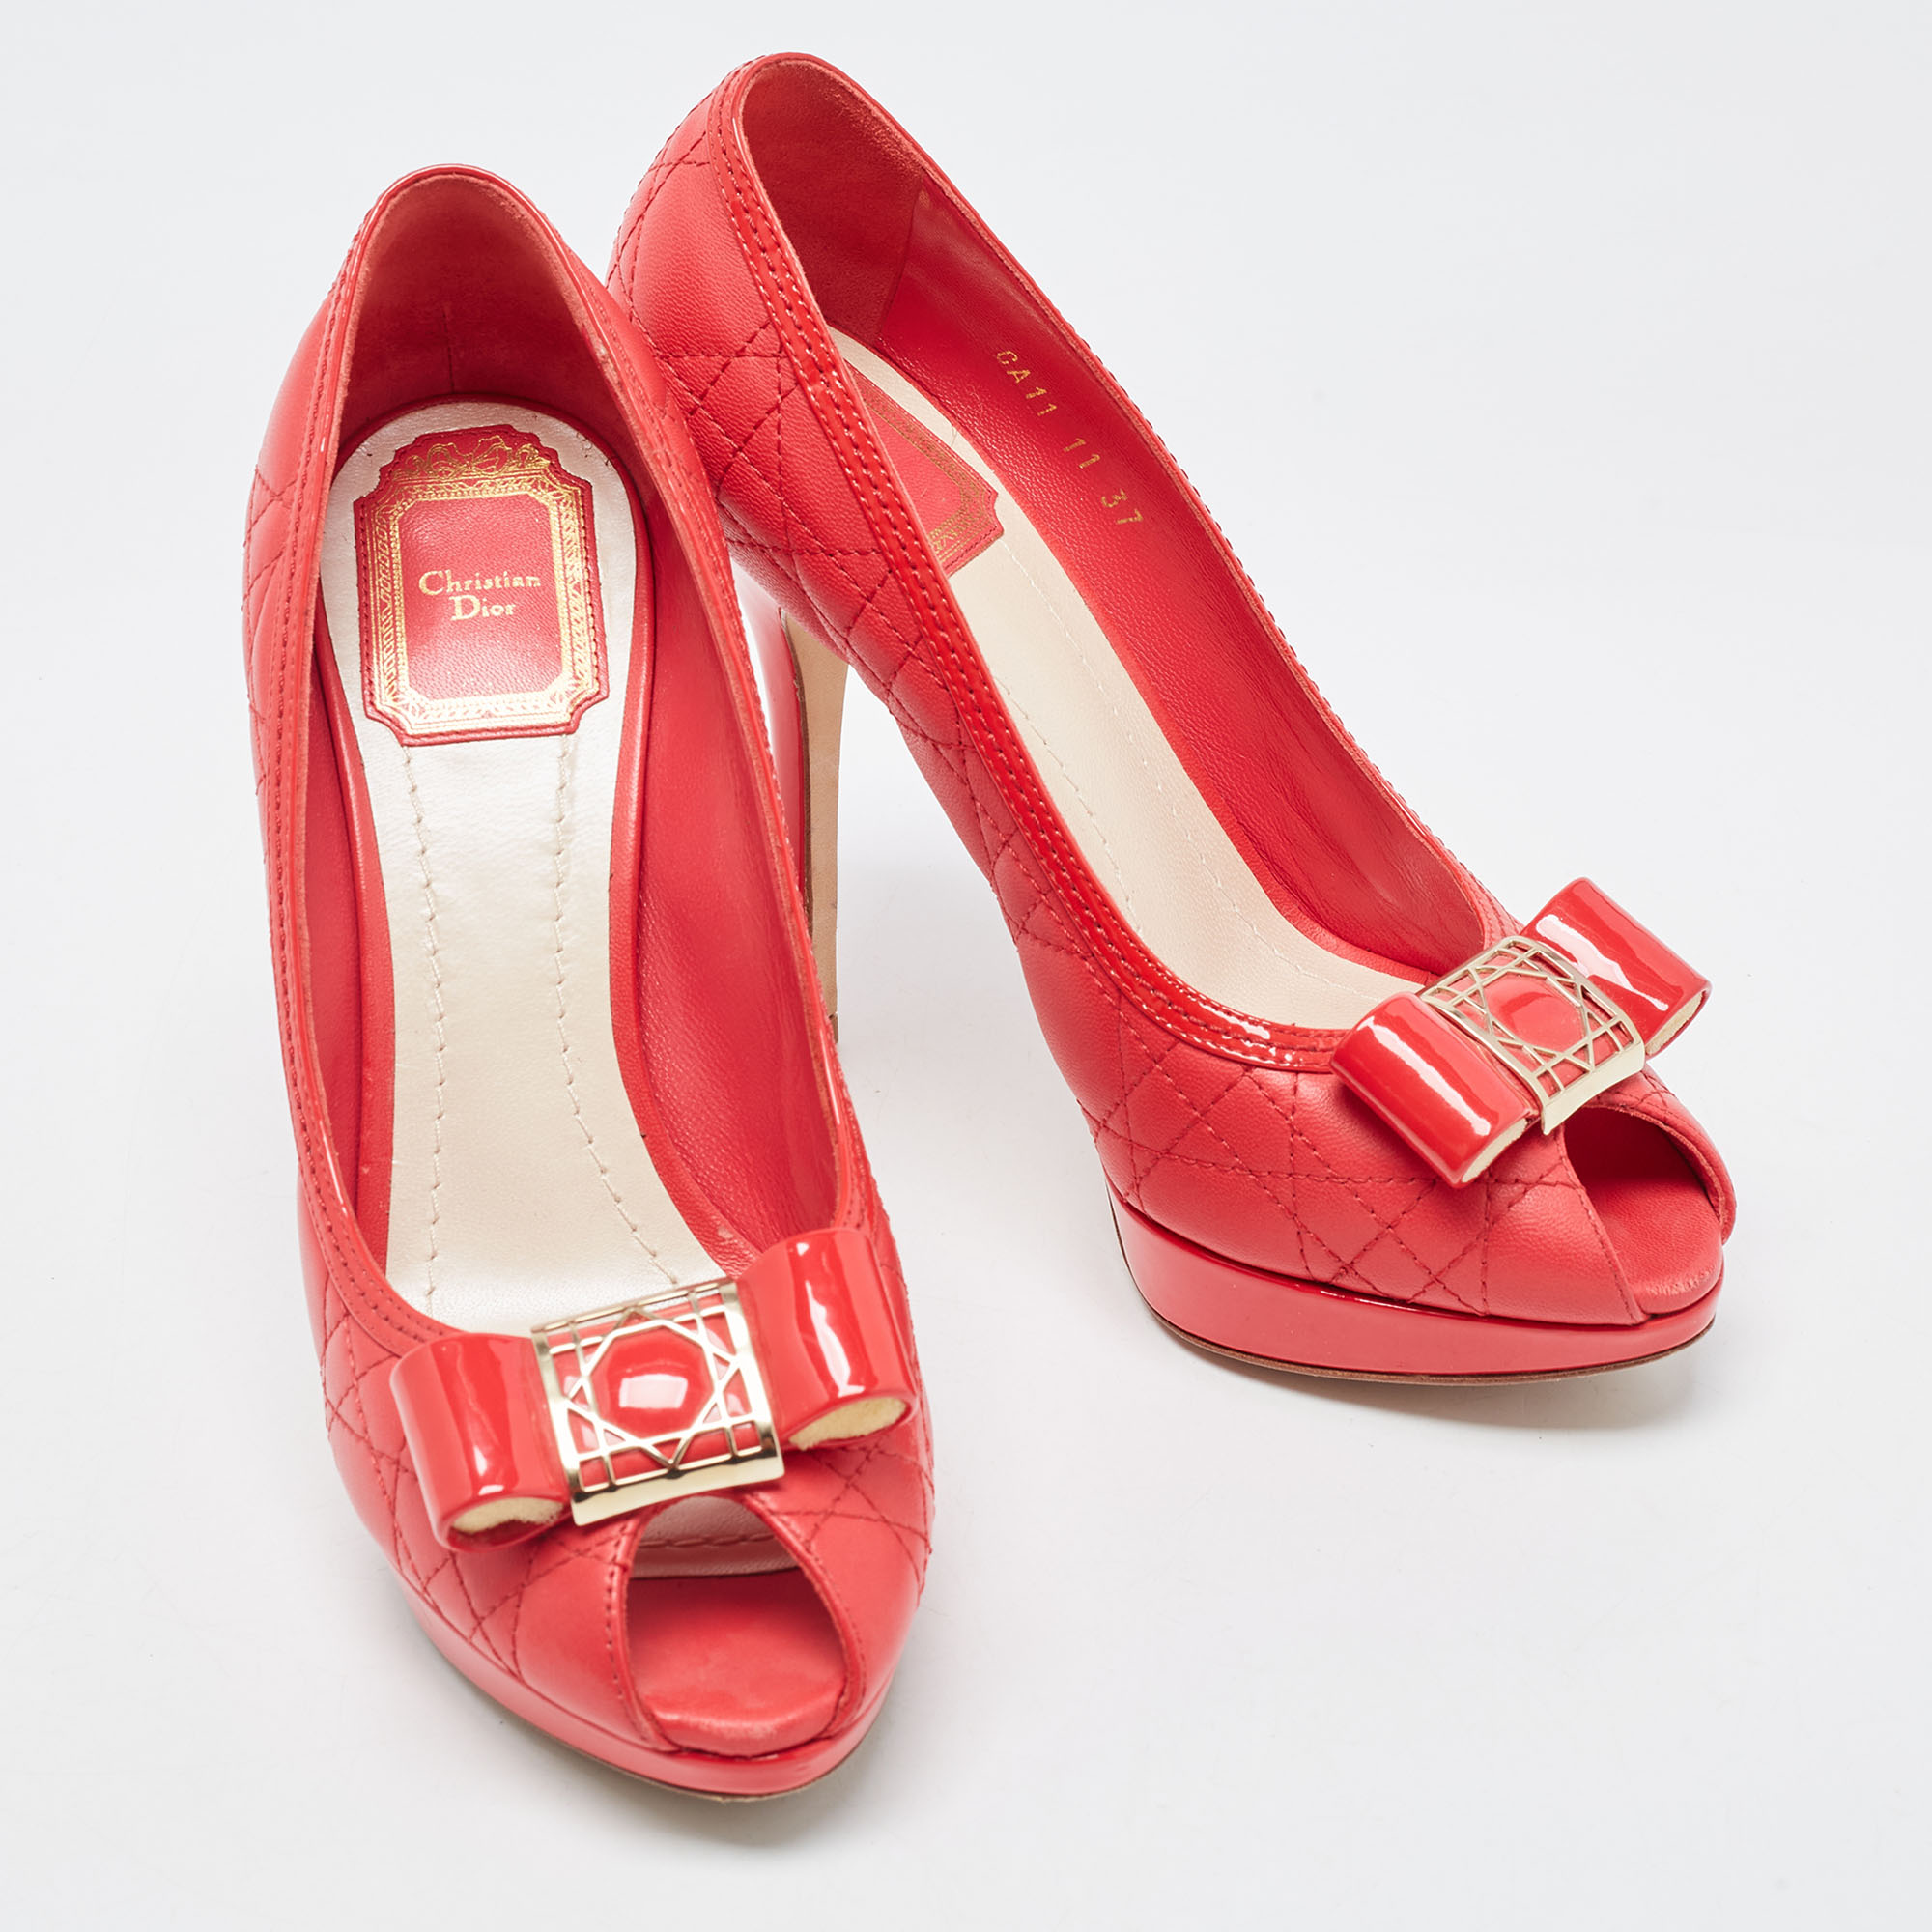 Dior Red Cannage Leather Bow Peep Toe Platform Pumps Size 37